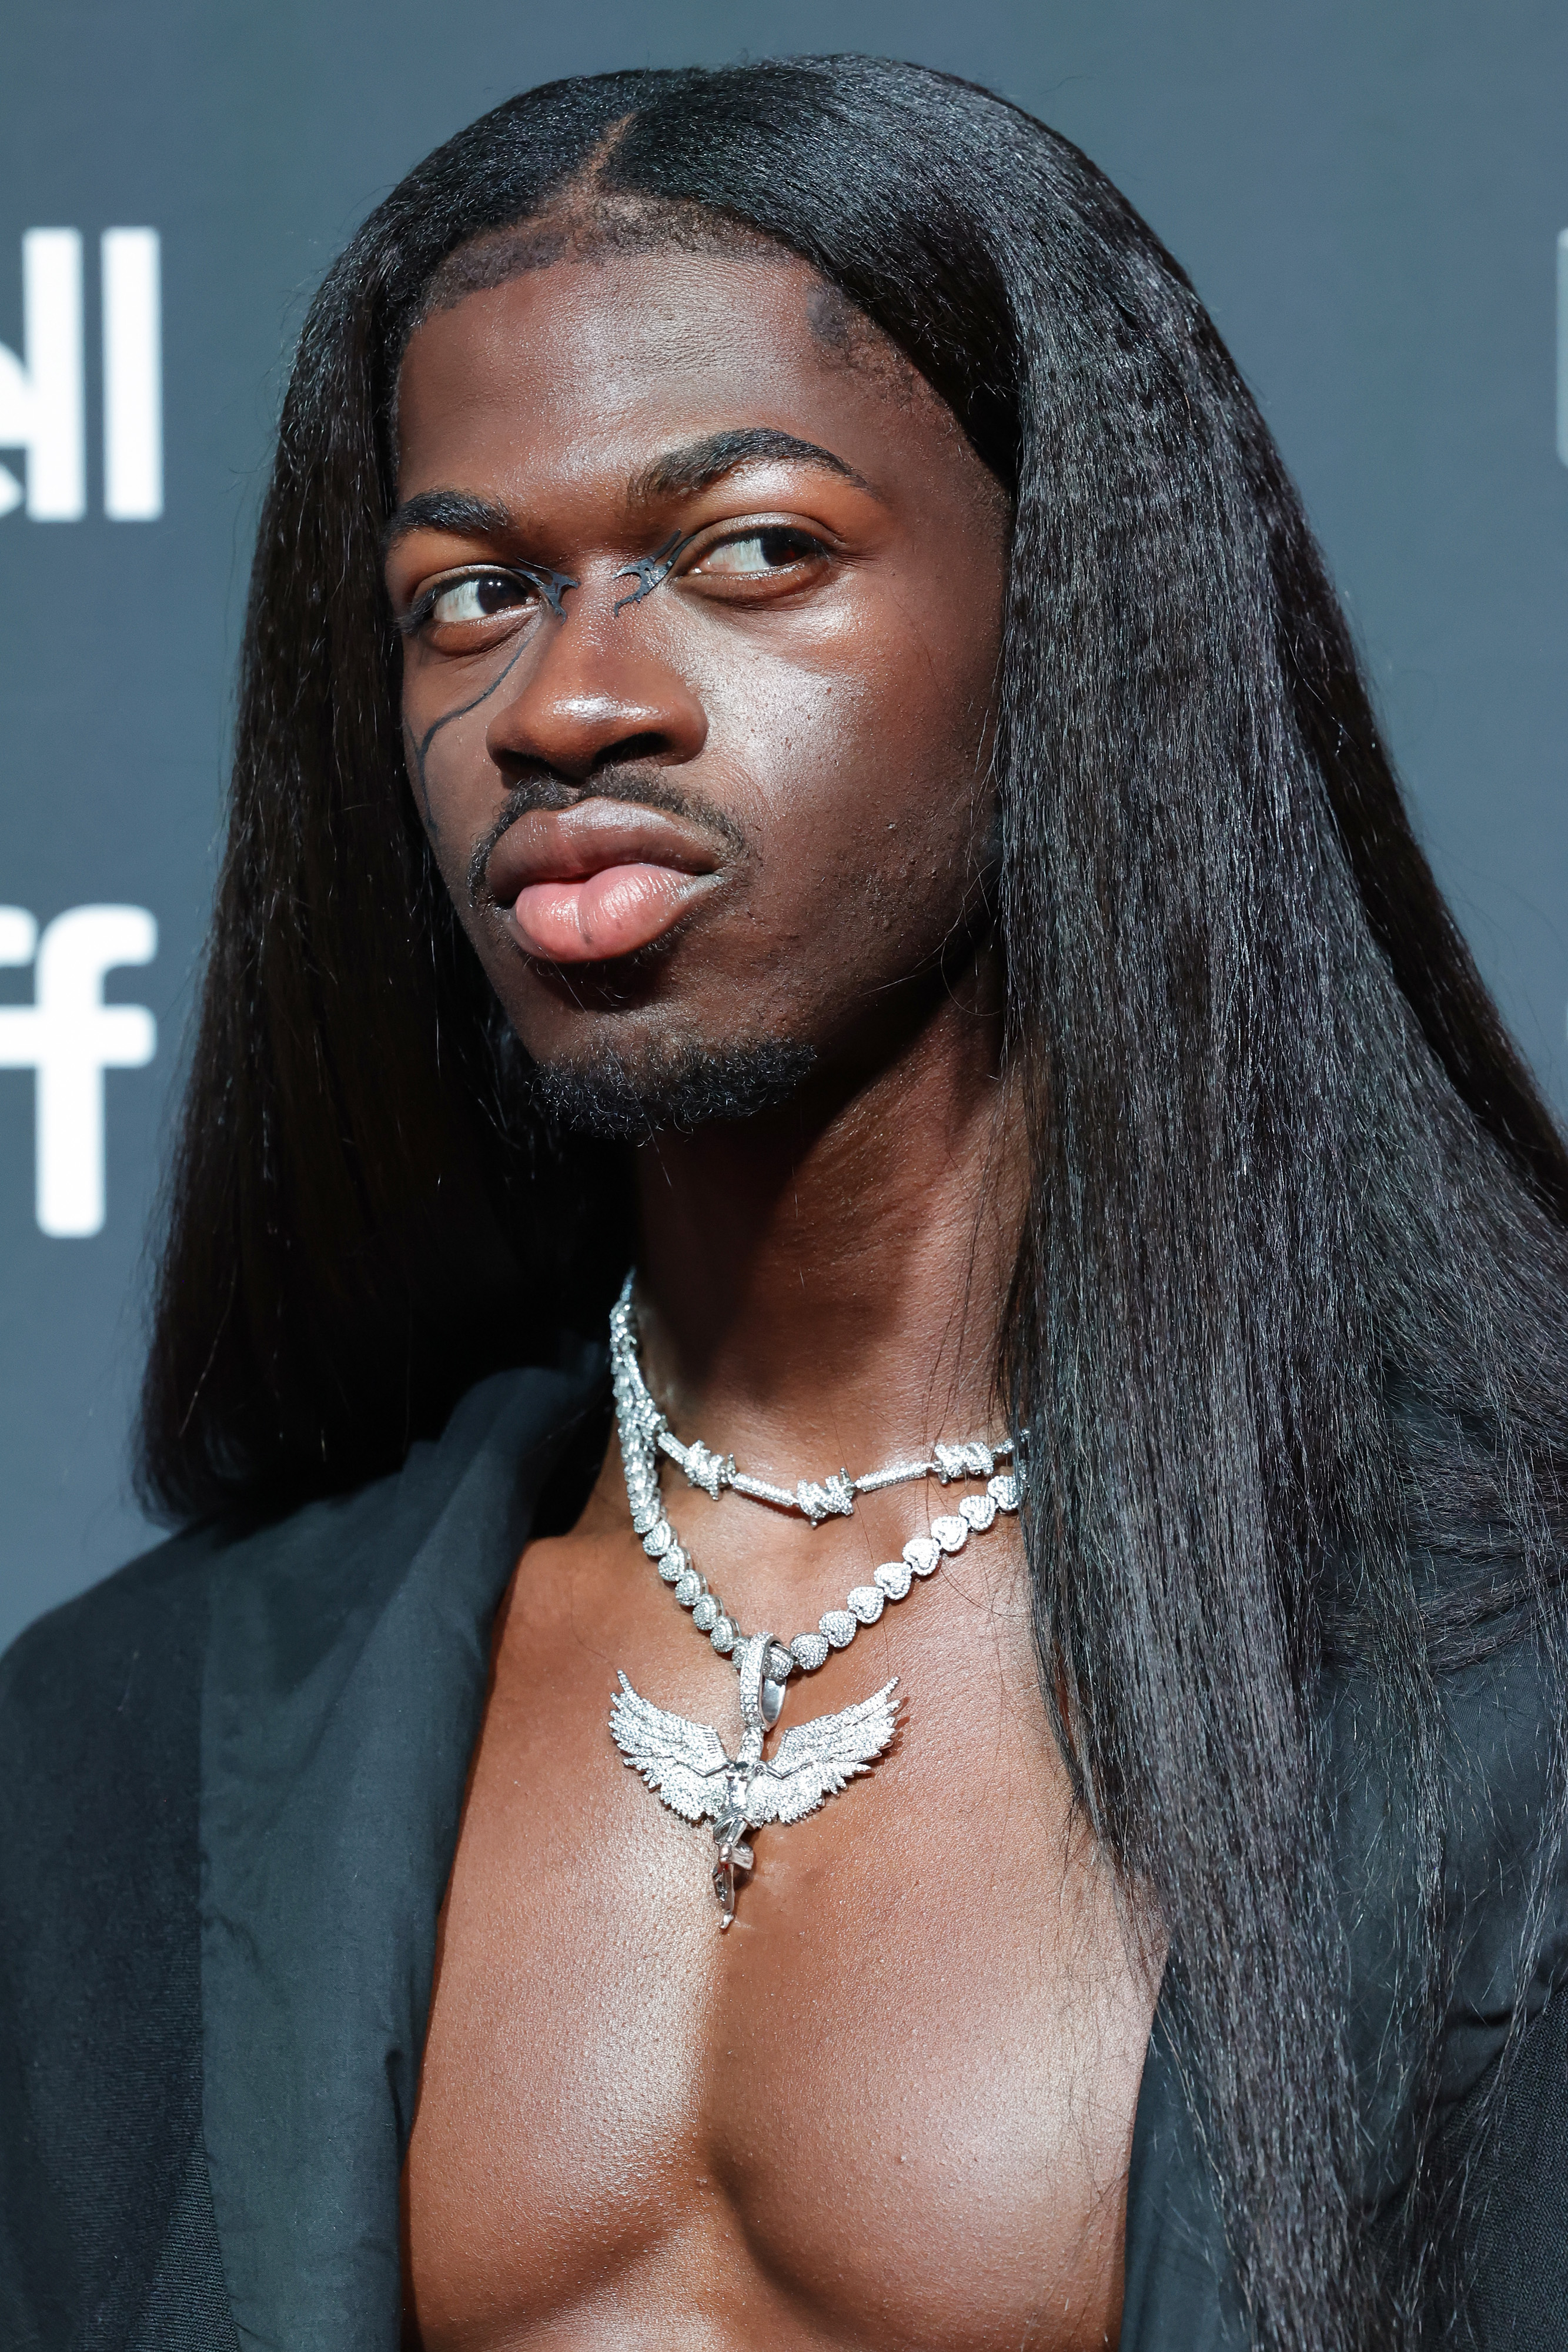 Close-up of Lil Nas X wearing a necklace and open jacket showing a bare chest